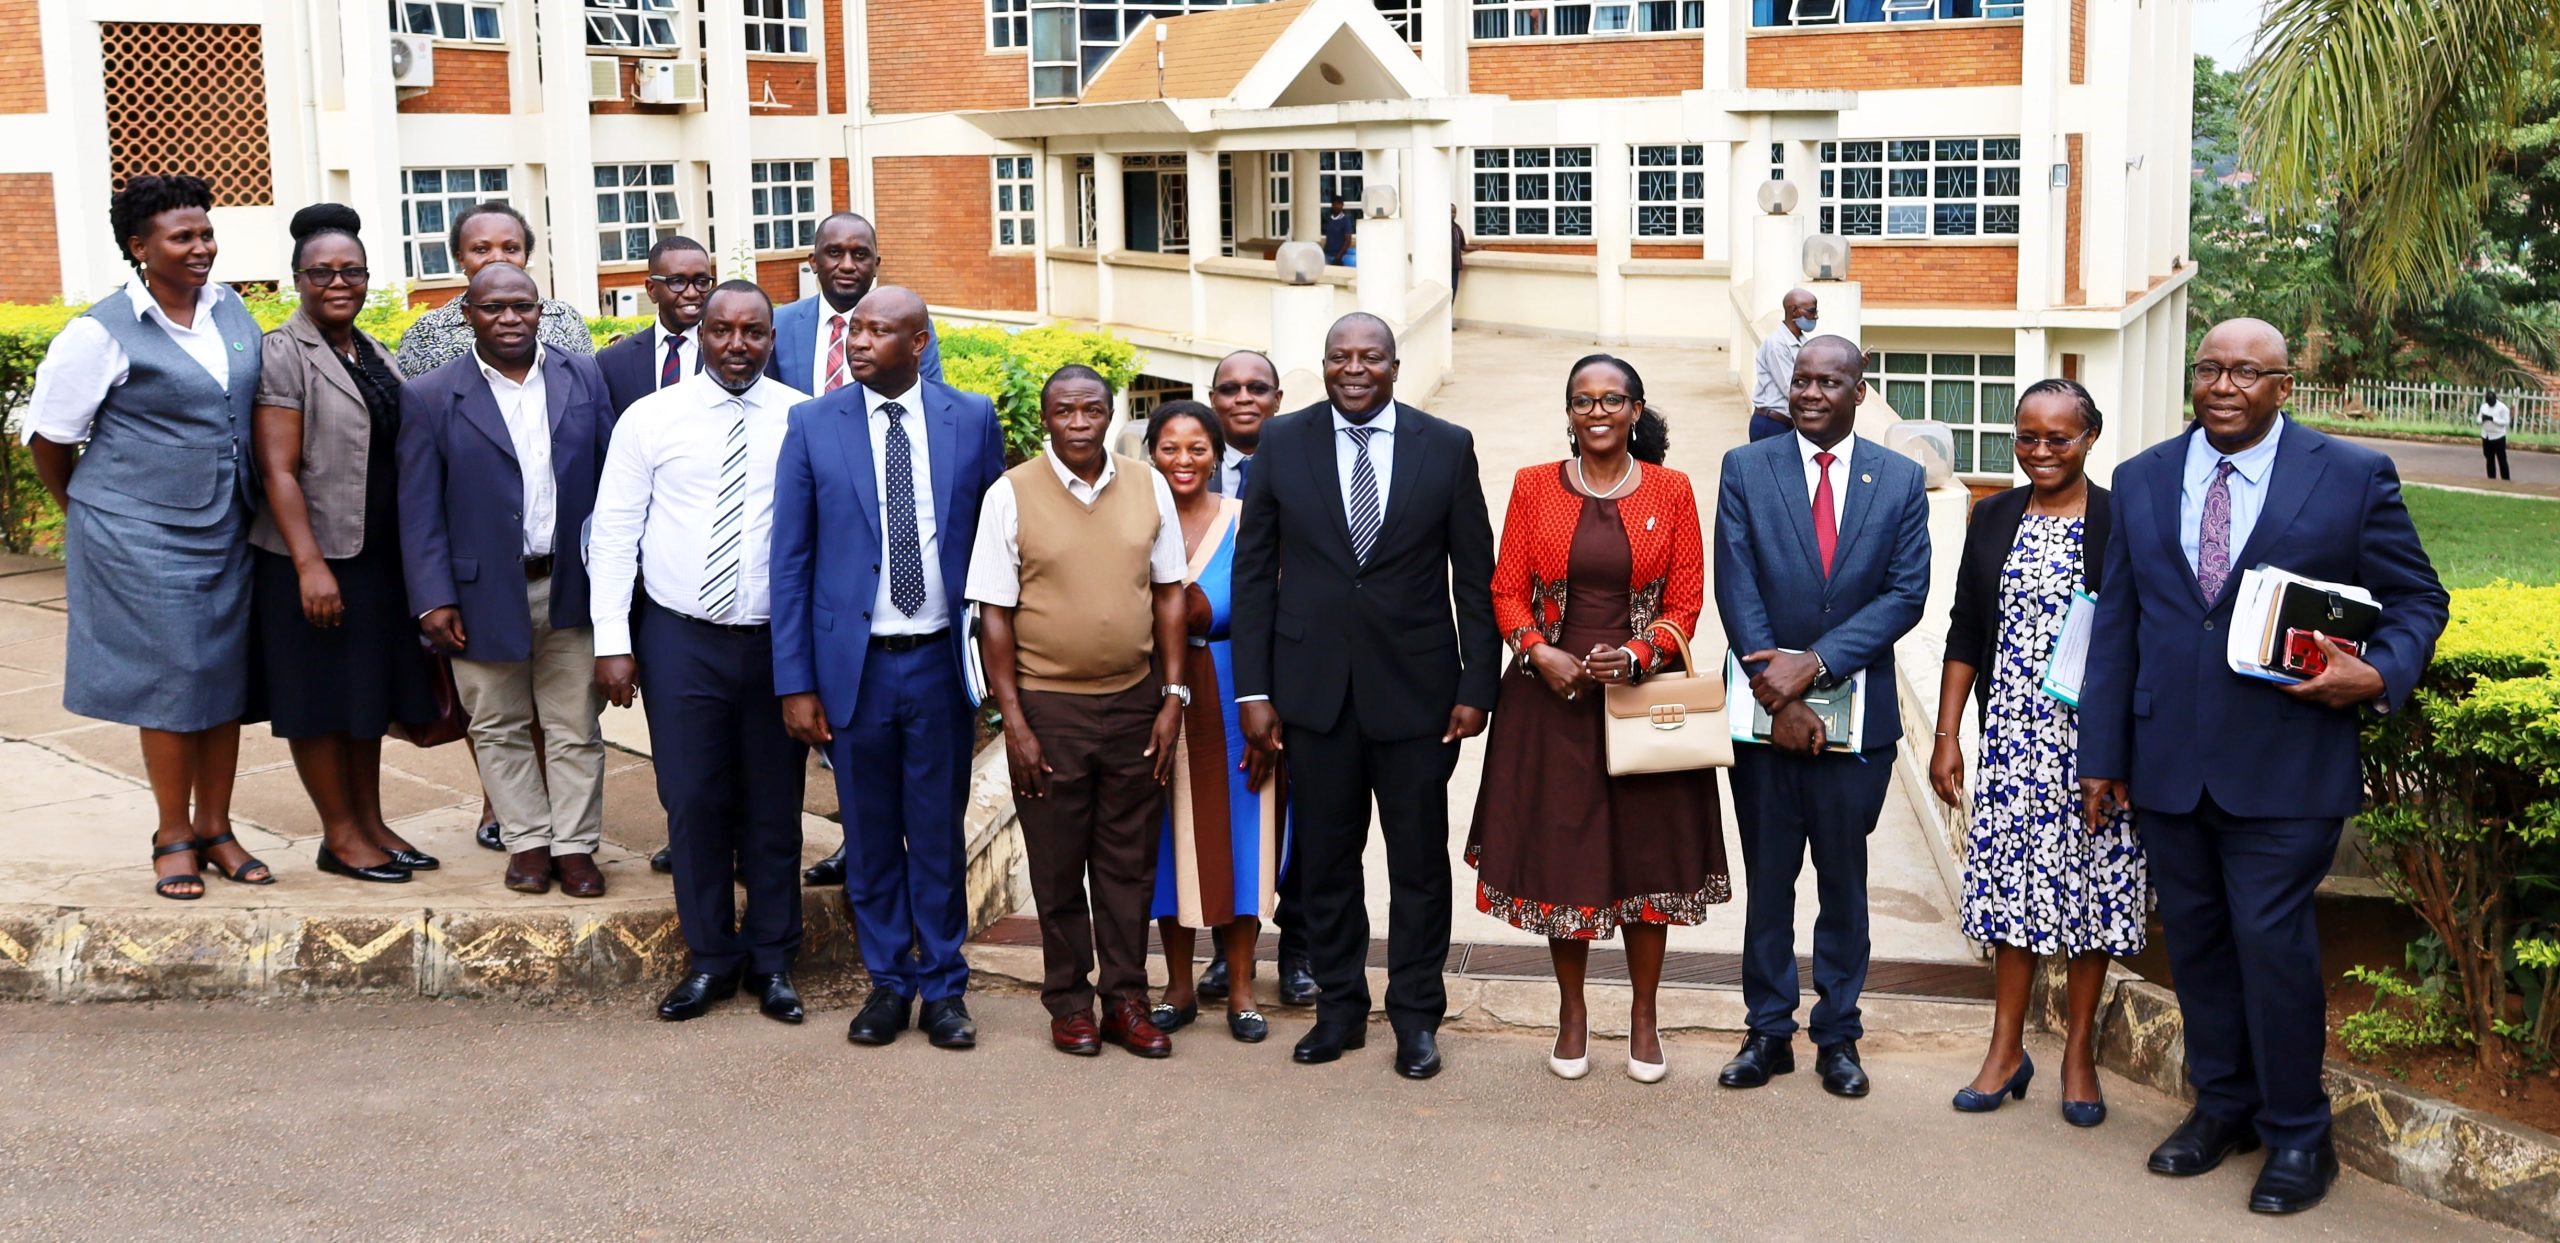 Council Members led by the Chairperson Mrs. Lorna Magara (4th Right) and CoCIS staff led by the Principal Prof. Tonny Oyana (5th Right) pose for a group photo after the meeting on 3rd March 2023.